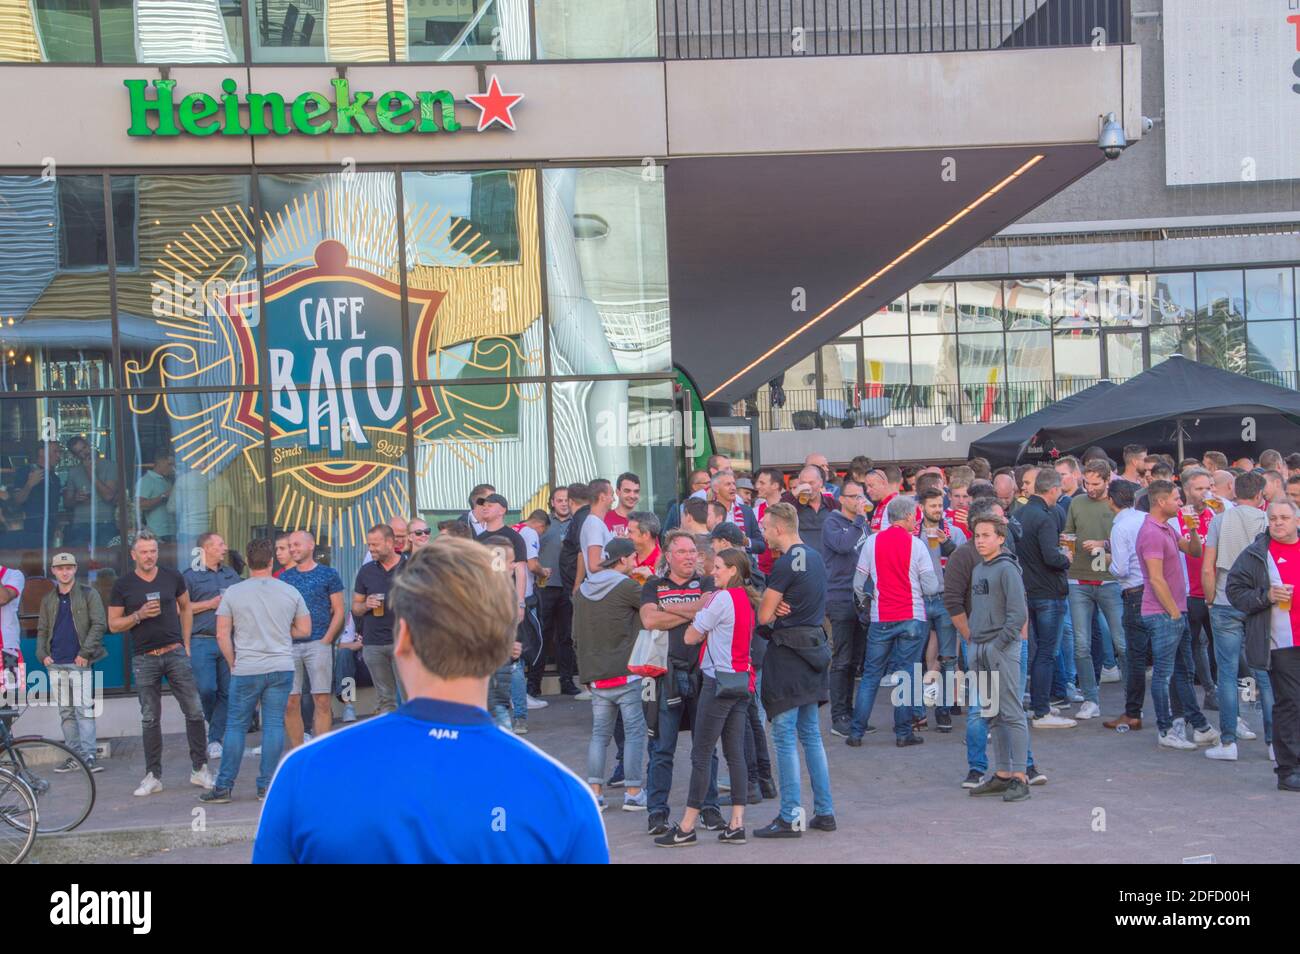 Ajax Supporters Preparing For The Match With AEK Athens At Amsterdam The  Netherlands 2018. The match takes place At 19-9-2018 at the Amsterdam Arena  S Stock Photo - Alamy